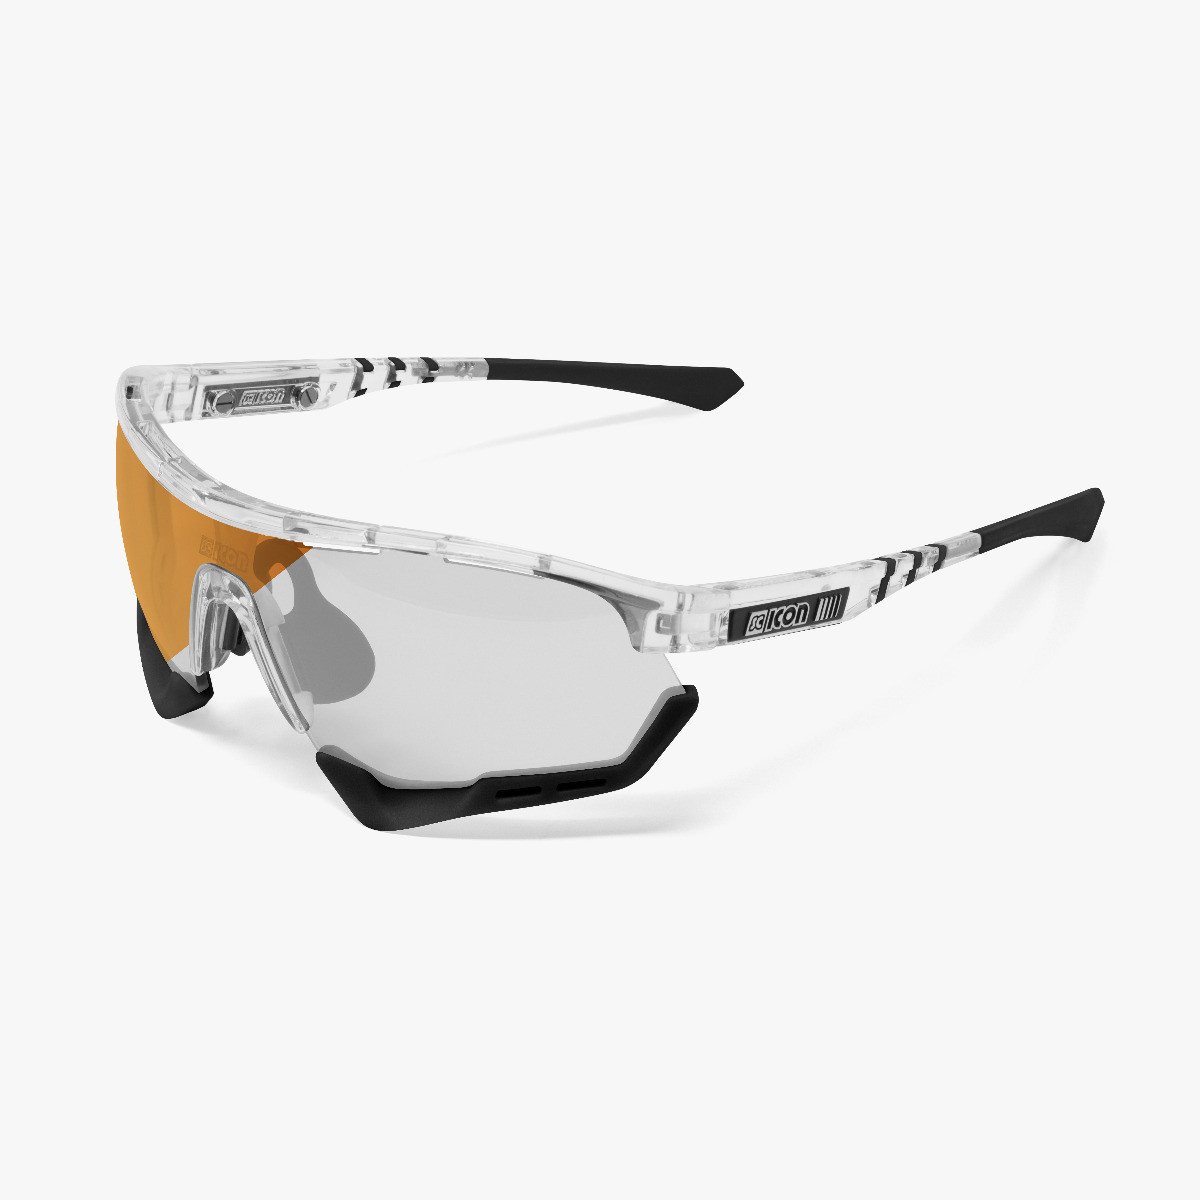 Scicon Sports | Aerotech Sport Cycling Performance Sunglasses - Crystal / Photocromatic Bronze - EY13170701